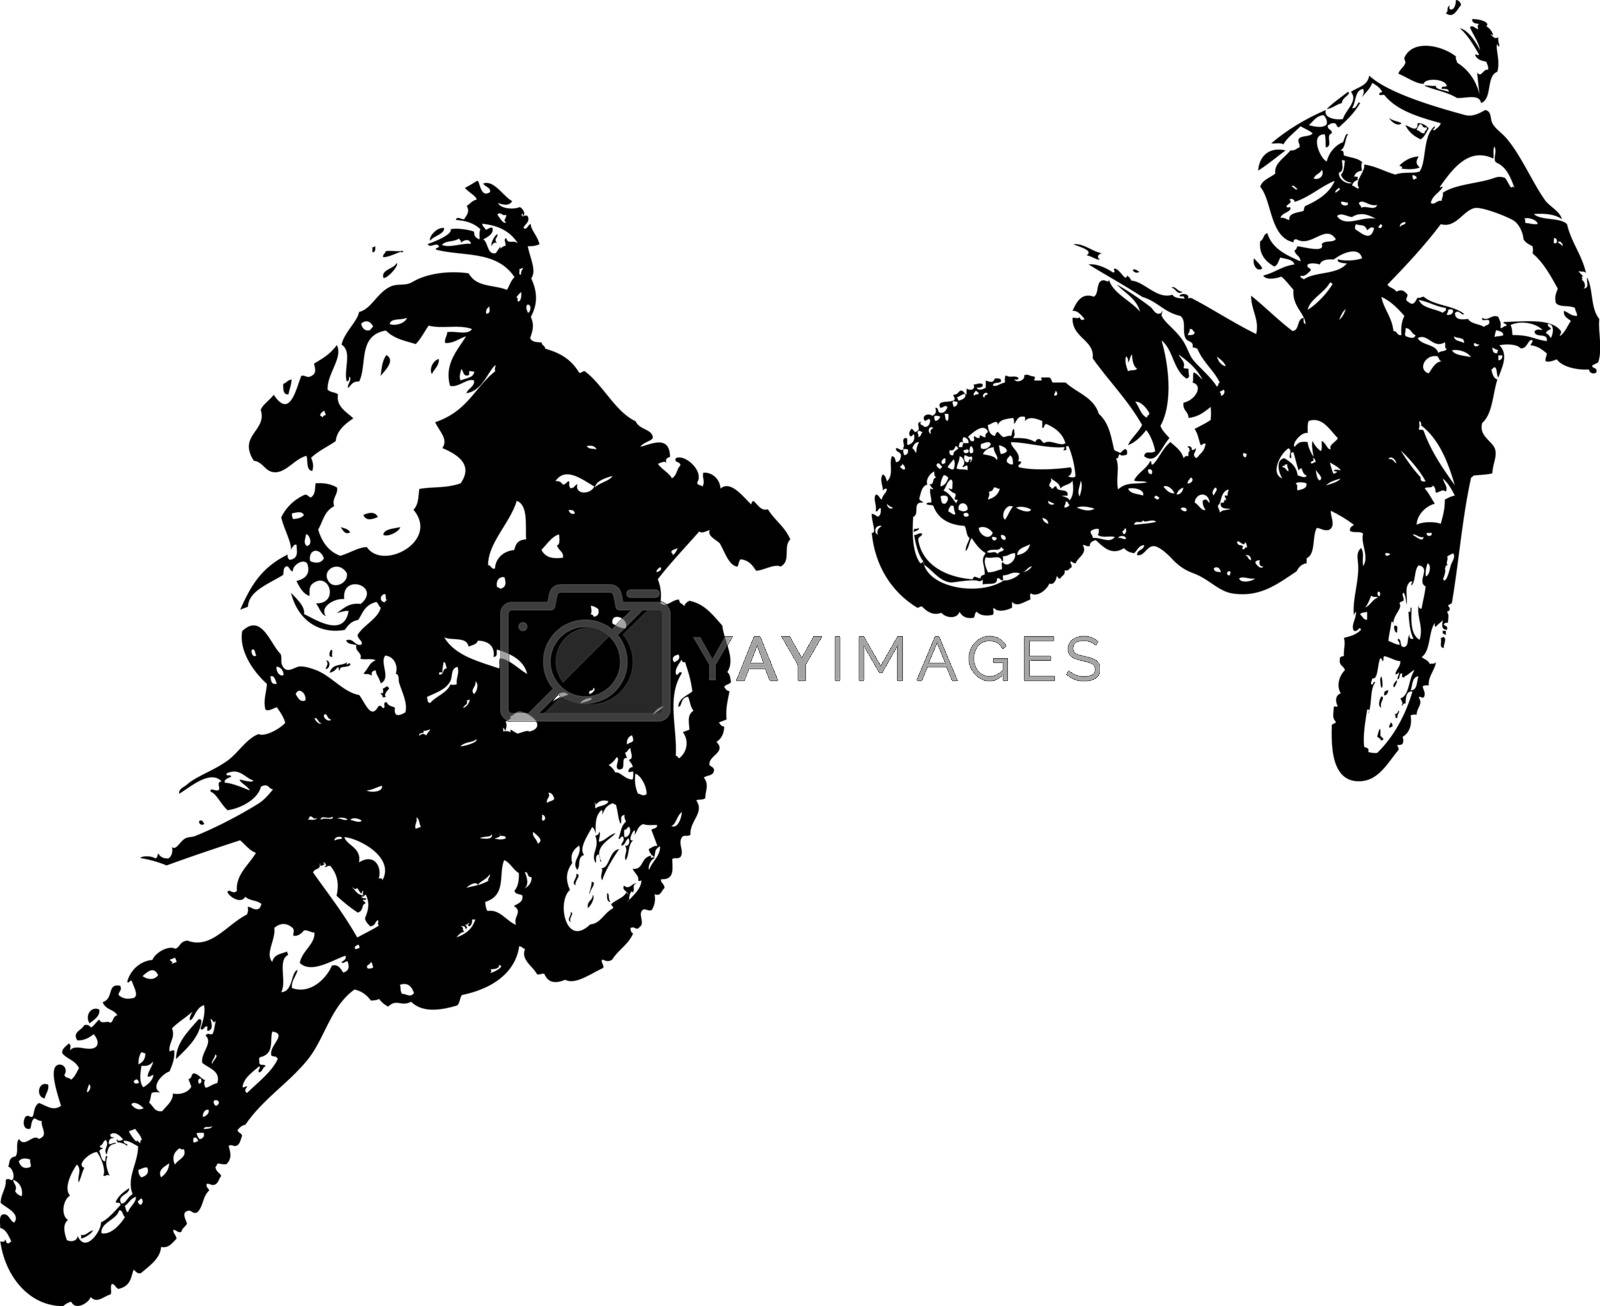 Royalty free image of Rider participates motocross championship. Vector illustration. by aarrows